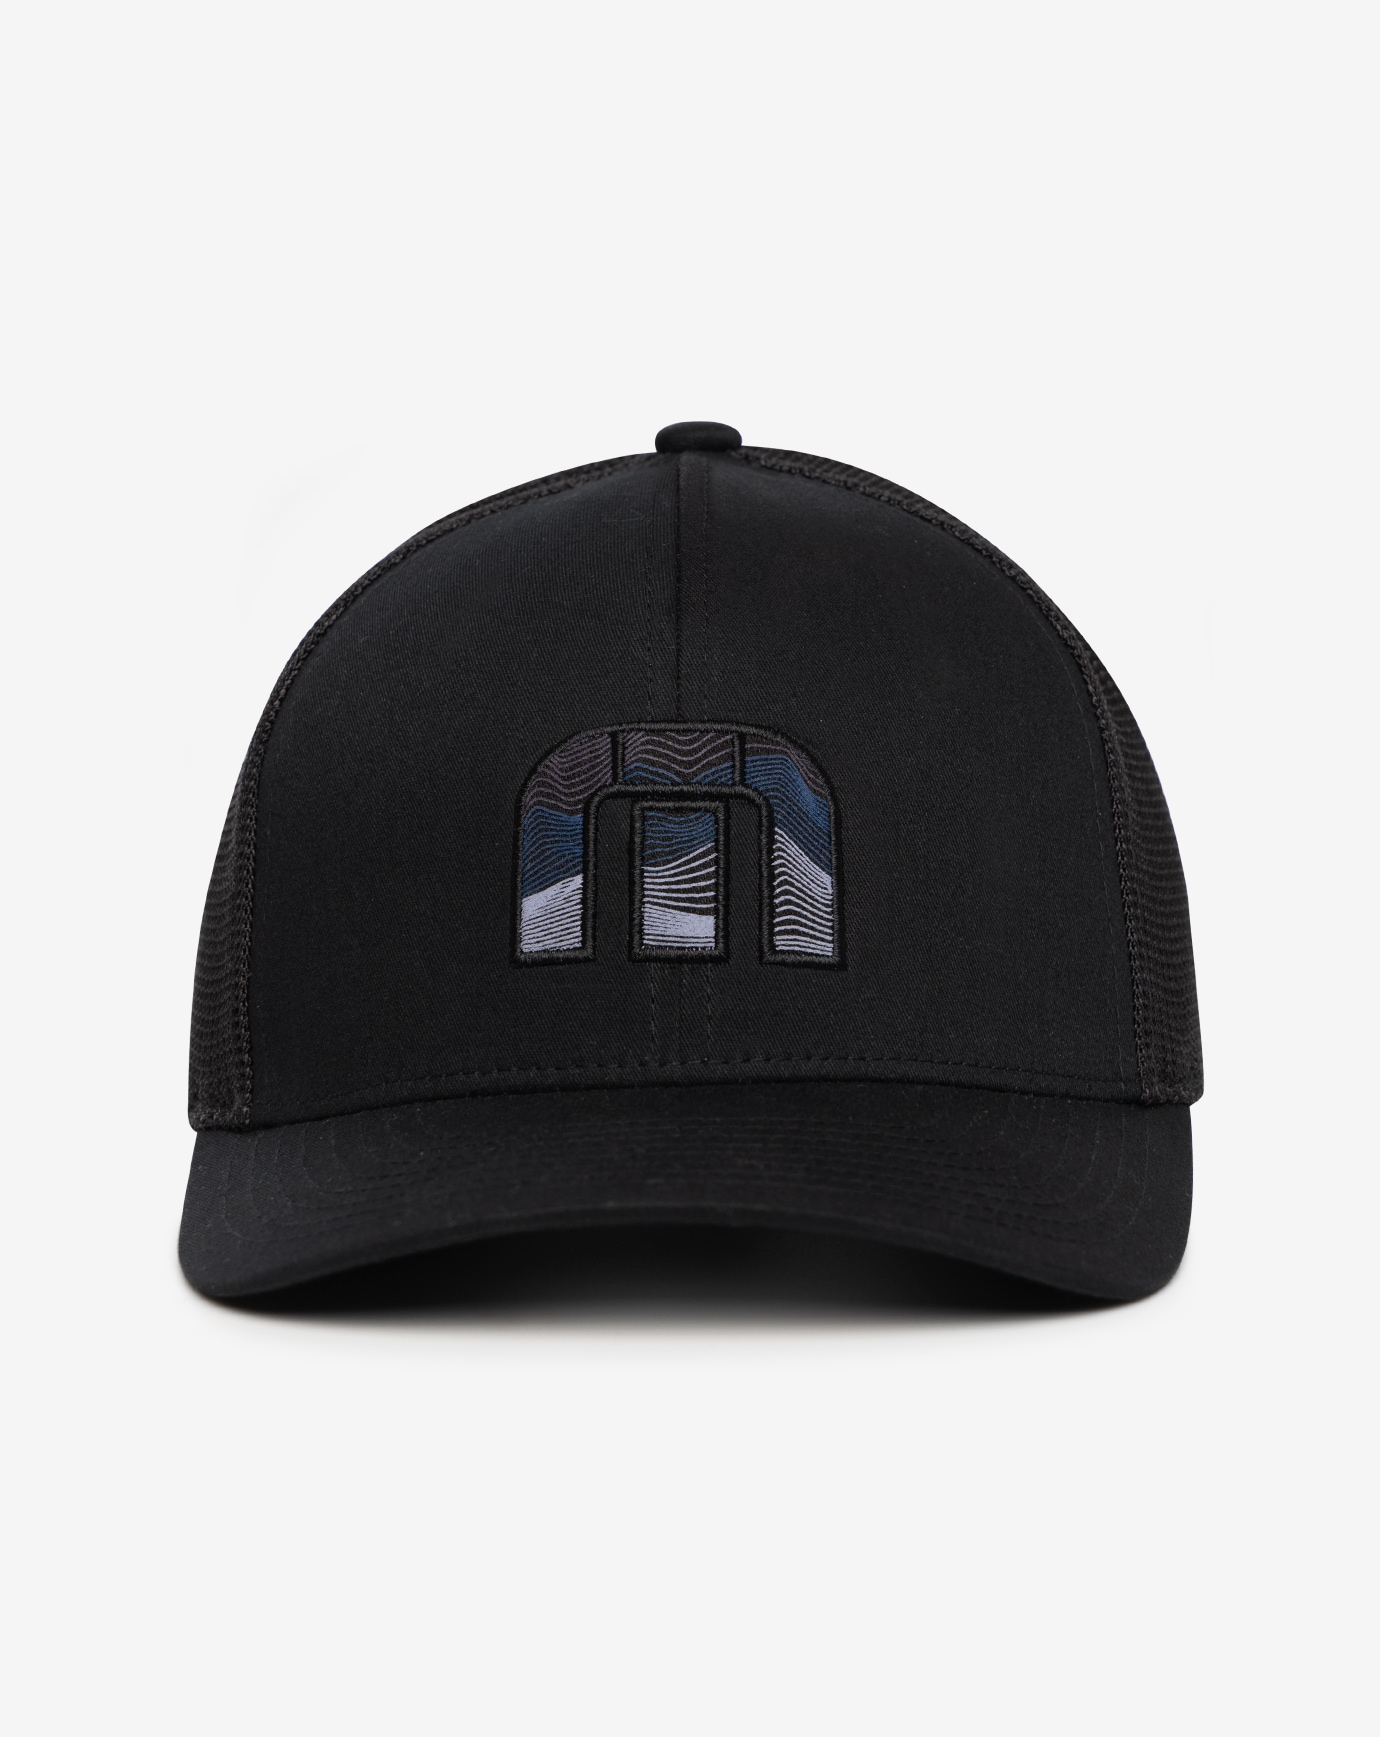 HEDGE FUND FITTED HAT Image 1